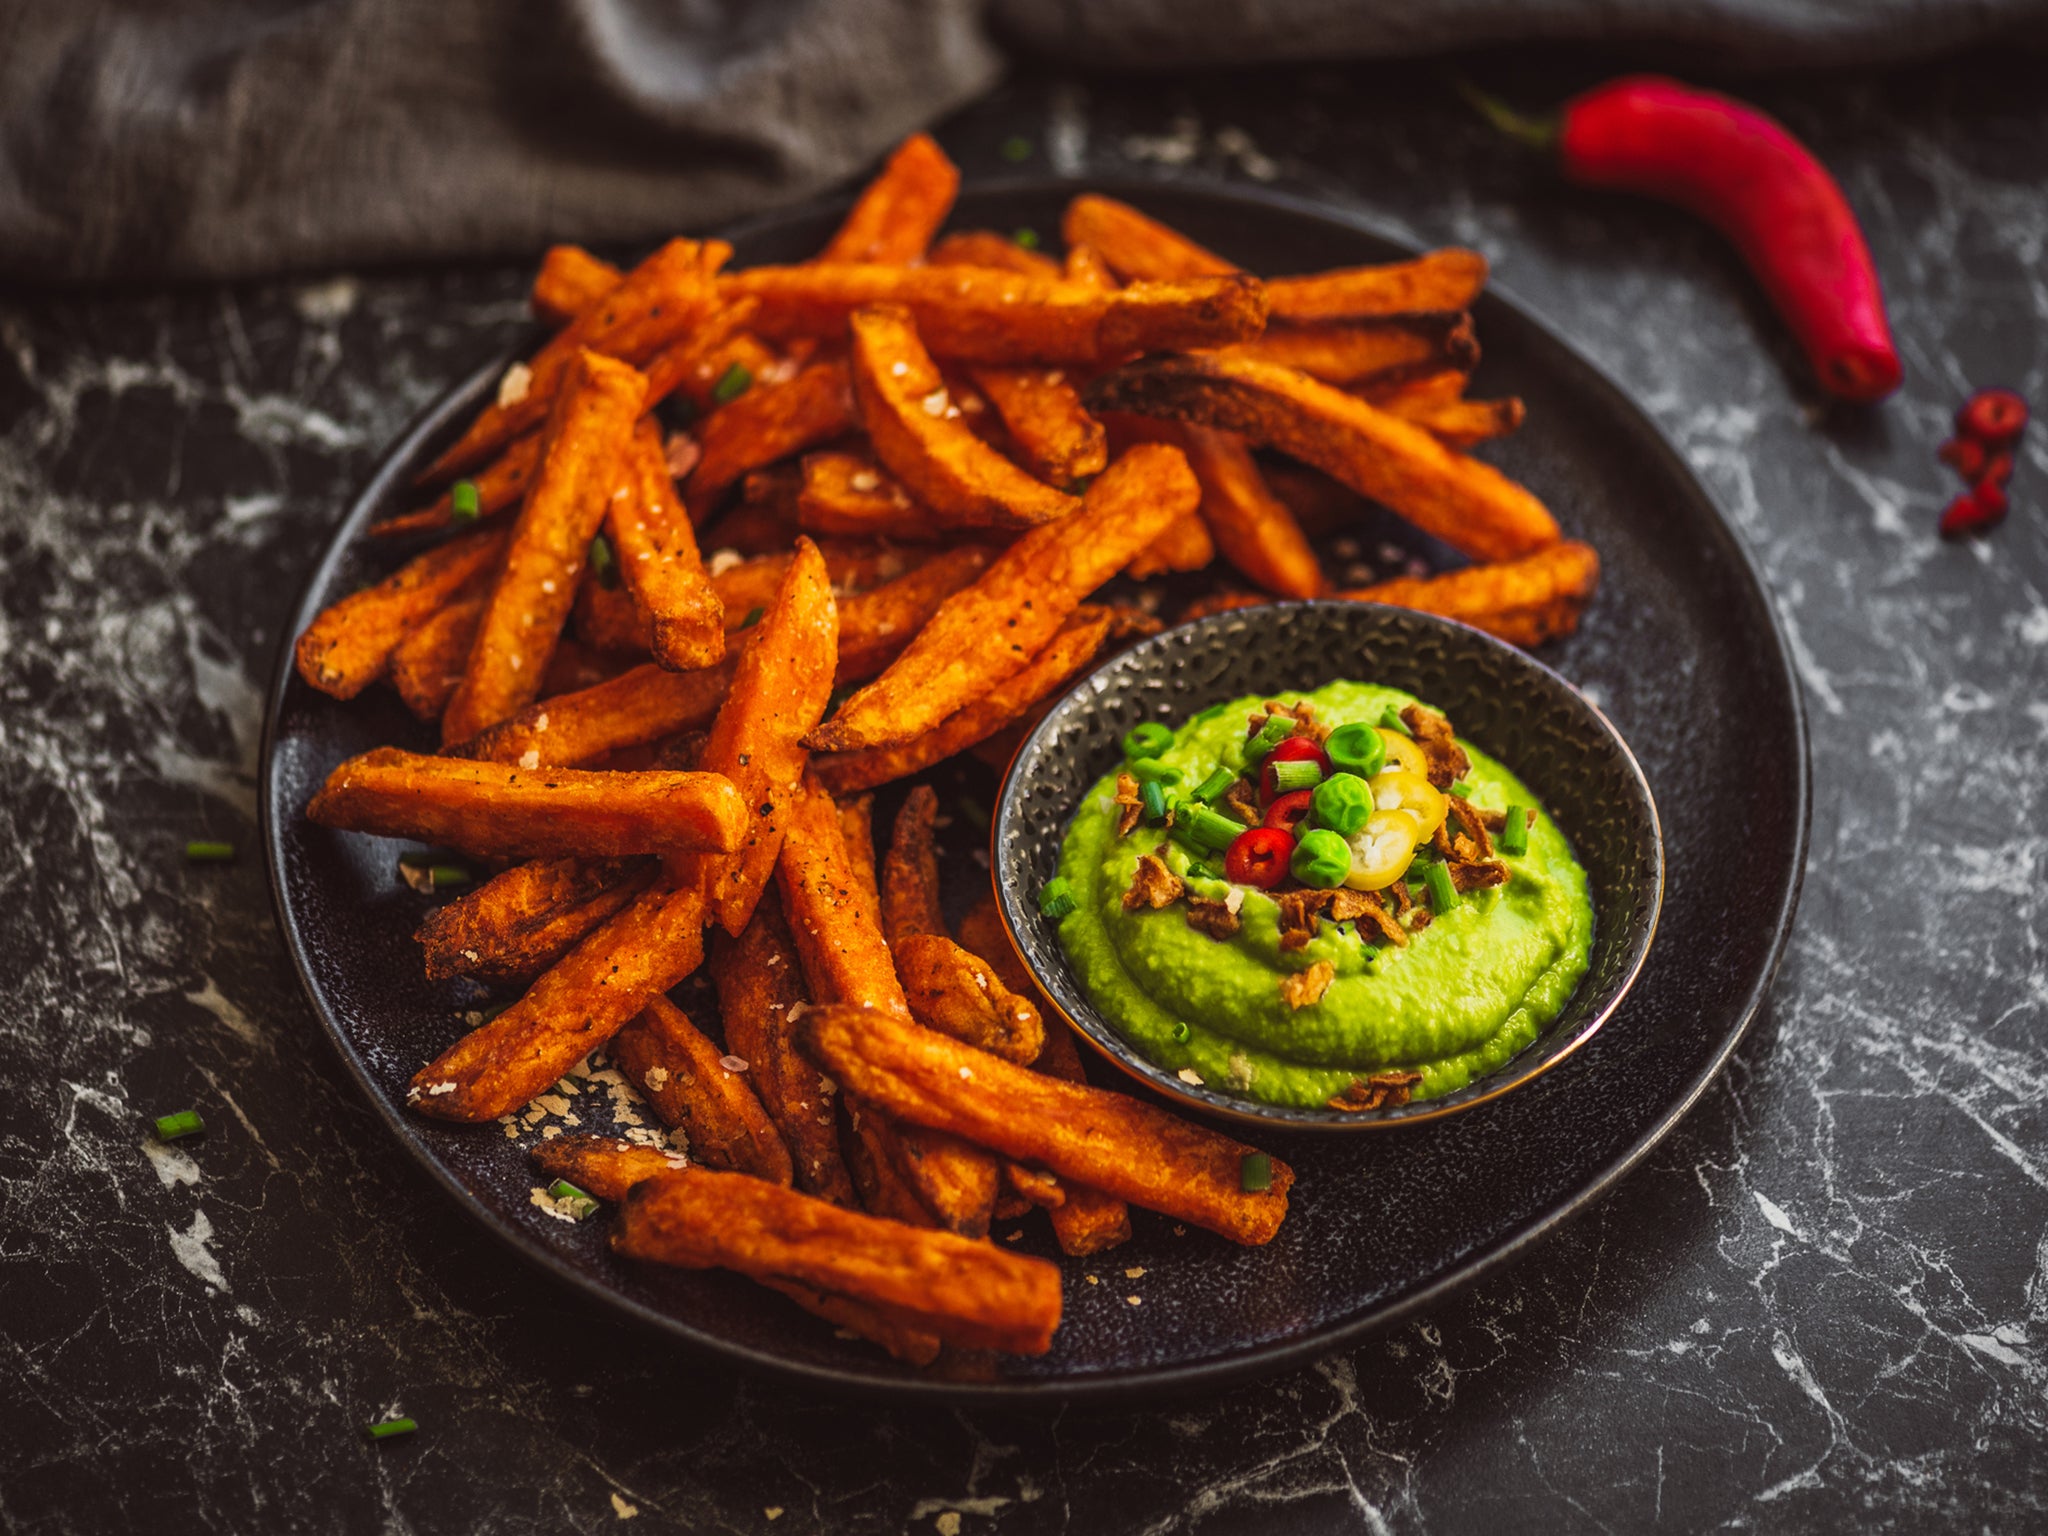 Crispy, delicious air fryer sweet potato fries, perfect for a healthy snack